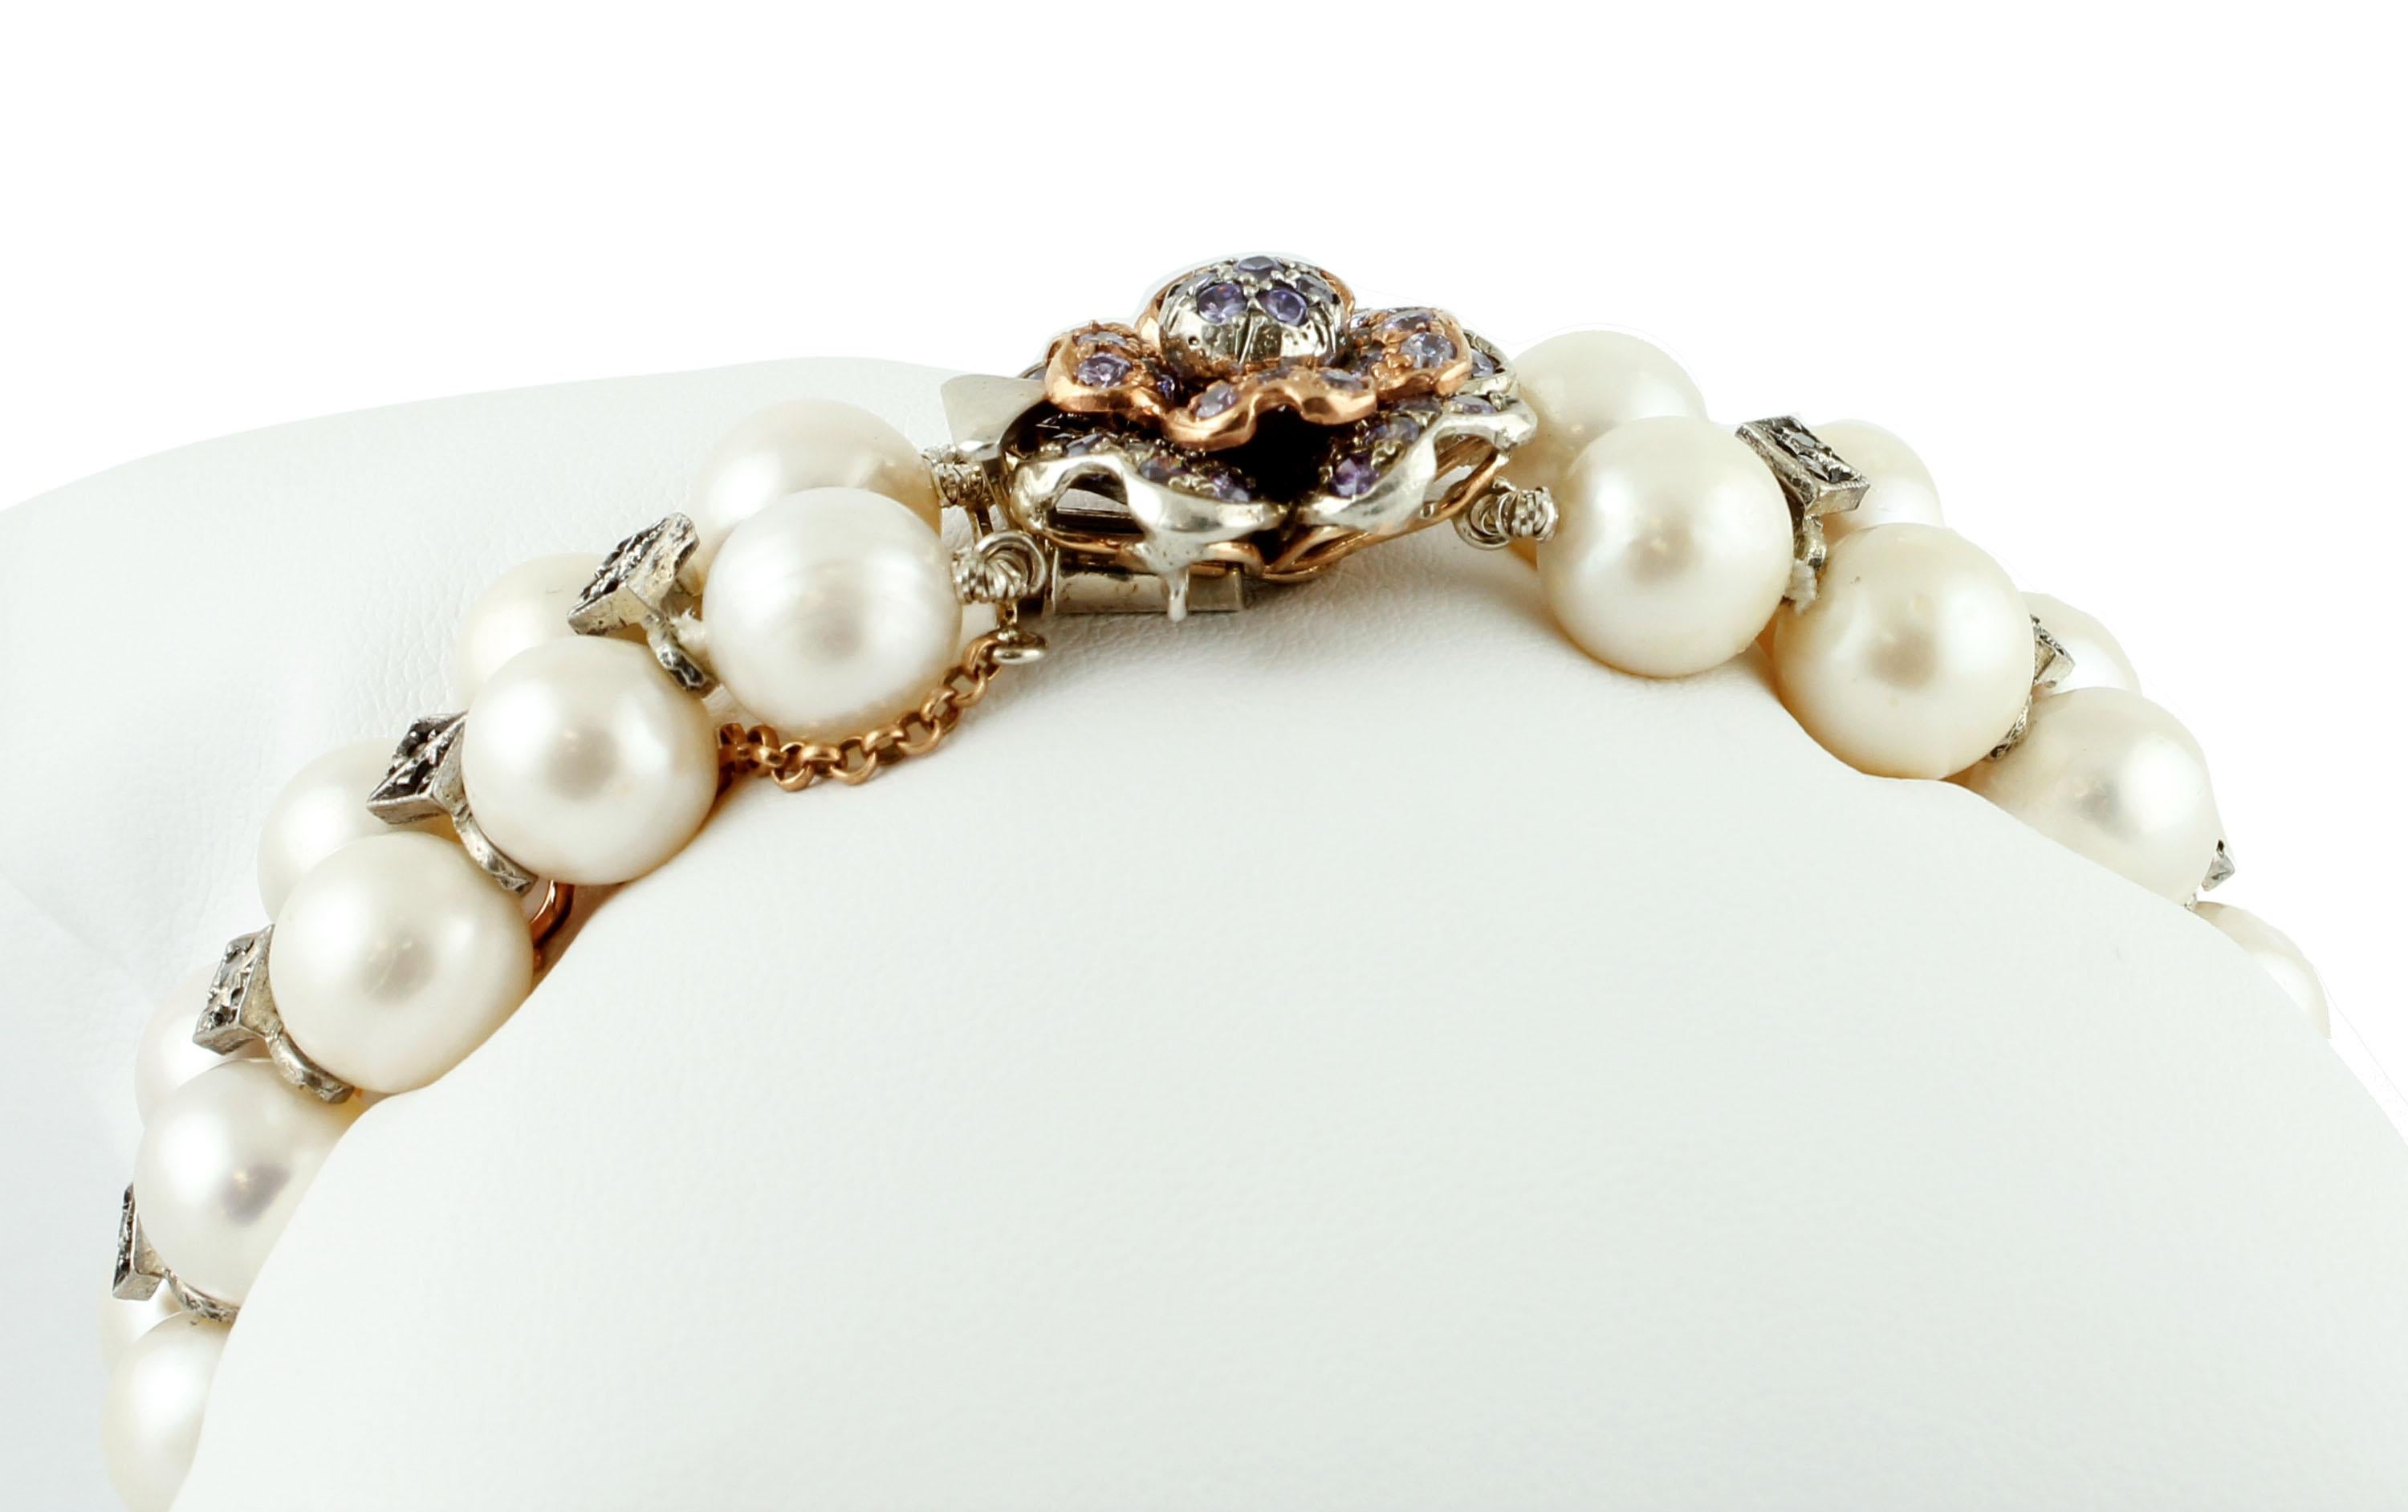 Beautiful beaded bracelet in 9k rose gold and silver structure, realized with two rows of south sea pearls enriched by decorations in silver and diamonds, and a flower-shaped closure in gold and silver structure studded with hard stone. 
The origin